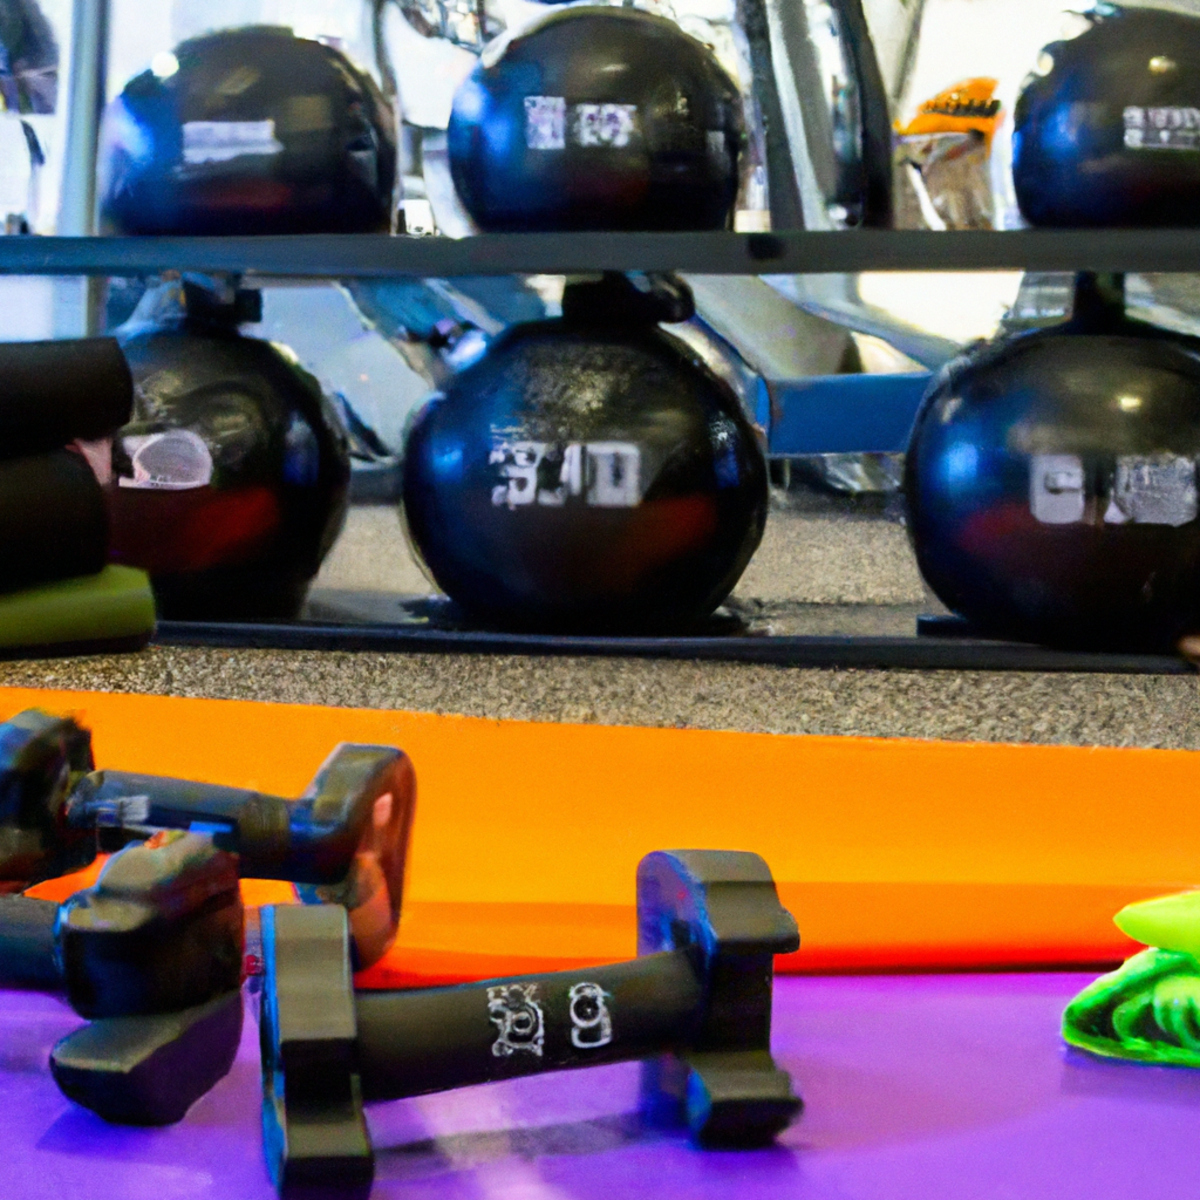 The photo features a sleek black yoga mat with a pair of dumbbells resting on top, surrounded by a set of resistance bands in varying colors. In the background, a digital screen displays a virtual fitness class with an energetic instructor leading a group of participants through a high-intensity workout. The scene is illuminated by bright studio lighting, creating a dynamic and motivating atmosphere for anyone looking to achieve their fitness goals from the comfort of their own home.